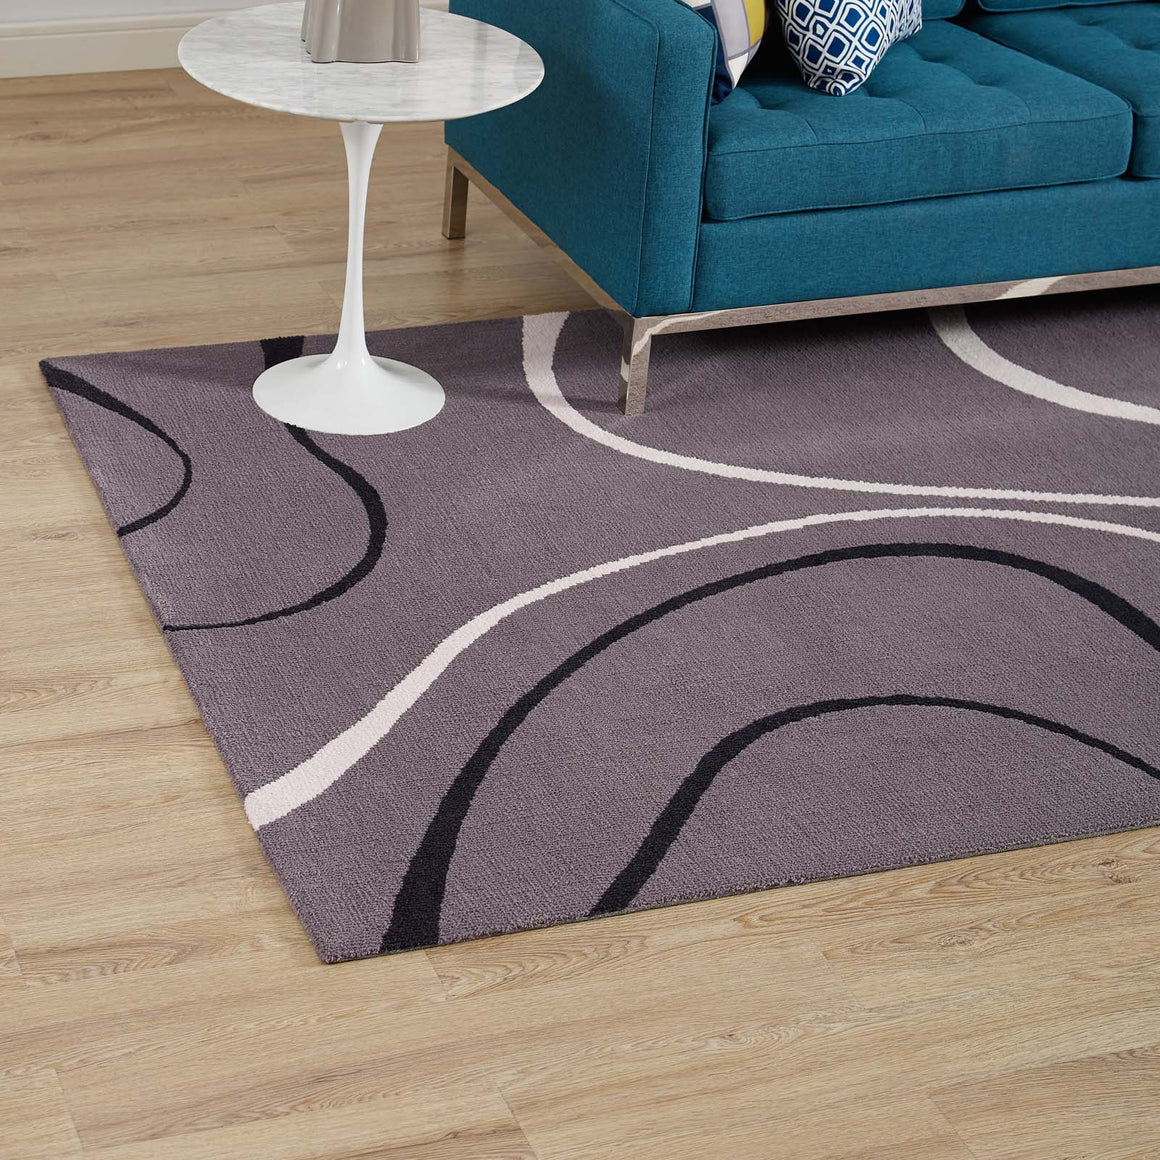 Therese Abstract Swirl 5x8 Area Rug Charcoal, Black and Ivory